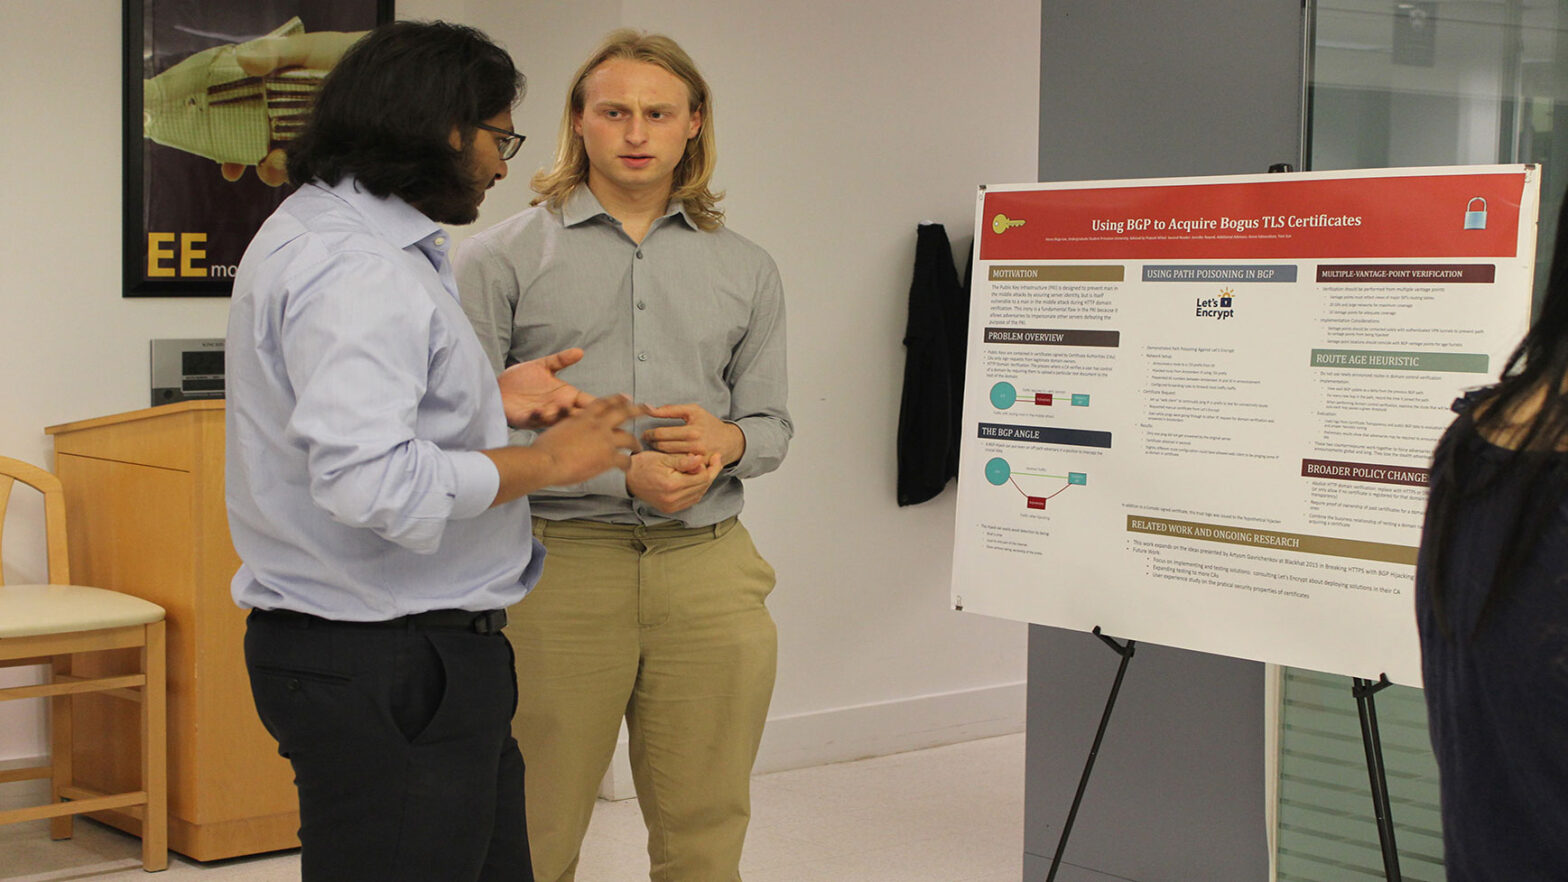 Research and student speak at poster presentation